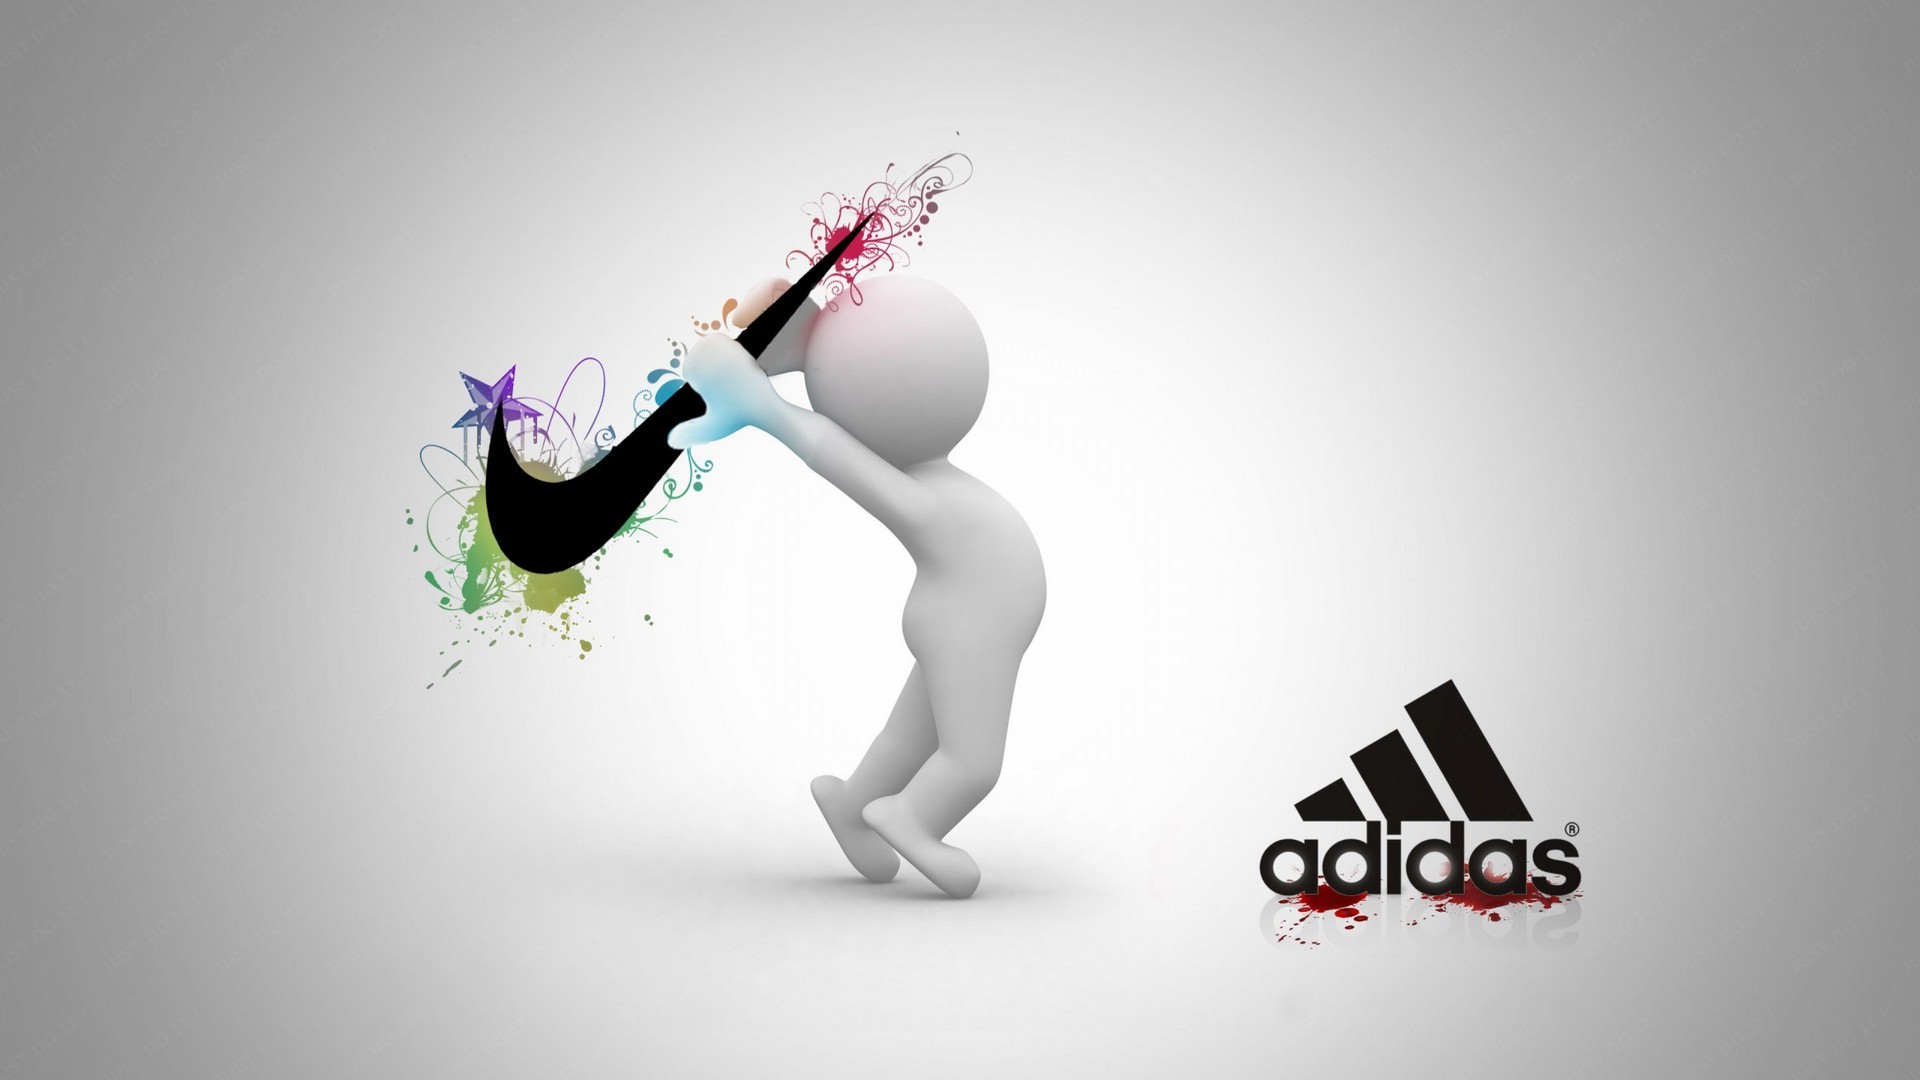 Adidas Logo Wallpaper with high-resolution 1920x1080 pixel. You can use this wallpaper for your Windows and Mac OS computers as well as your Android and iPhone smartphones